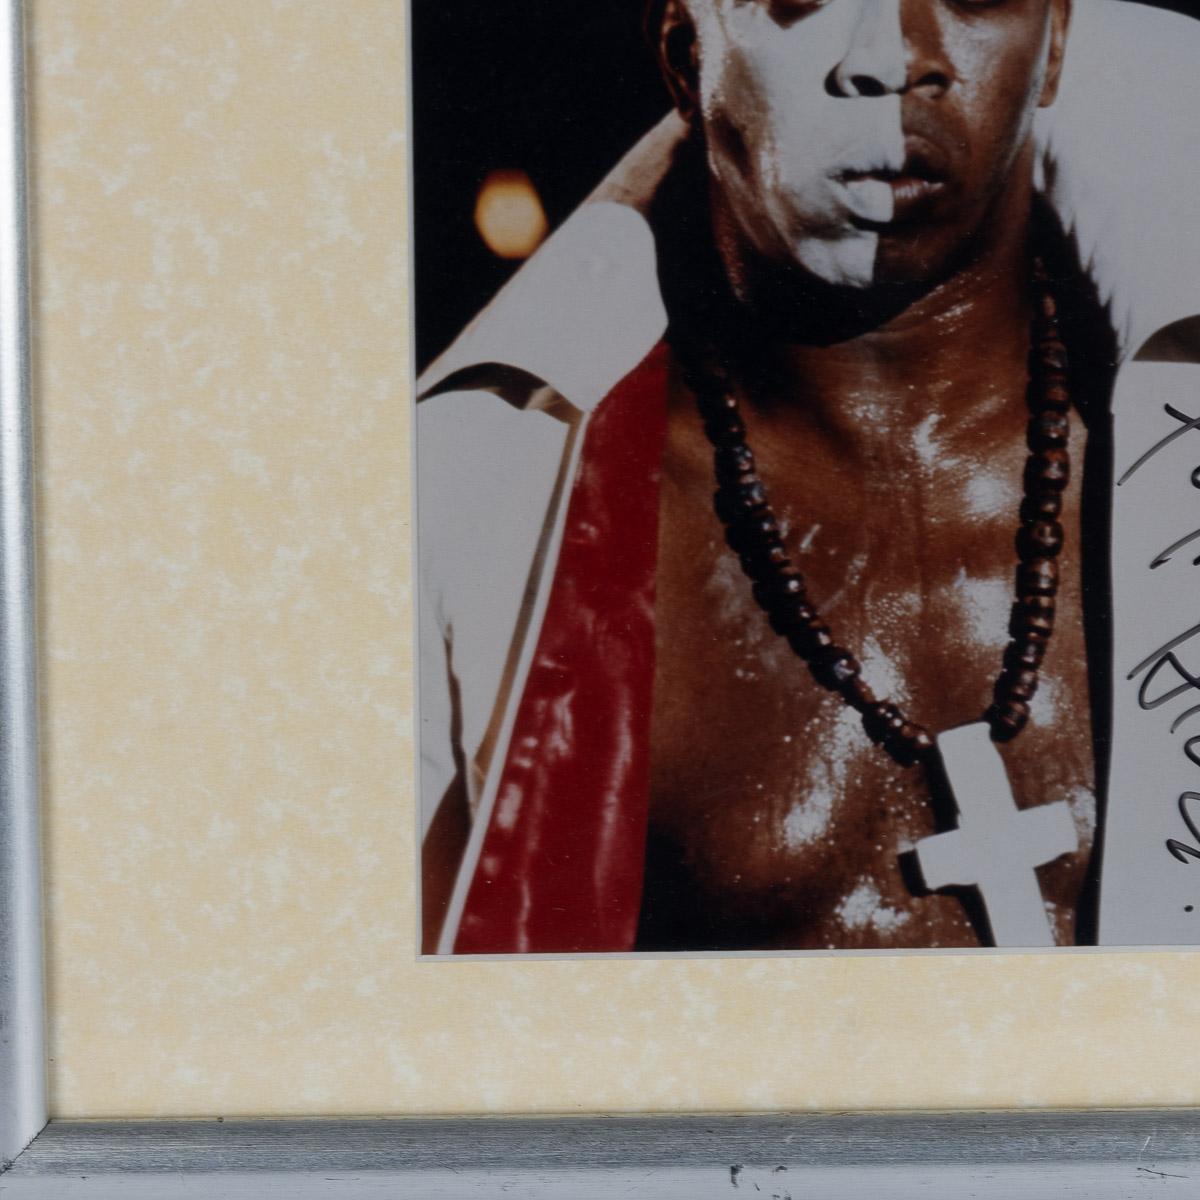 A rare signed photograph by Geoffrey Holder & miniature movie posters. Geoffrey Holder portrayed the charismatic and enigmatic Baron Samedi in the James Bond film 